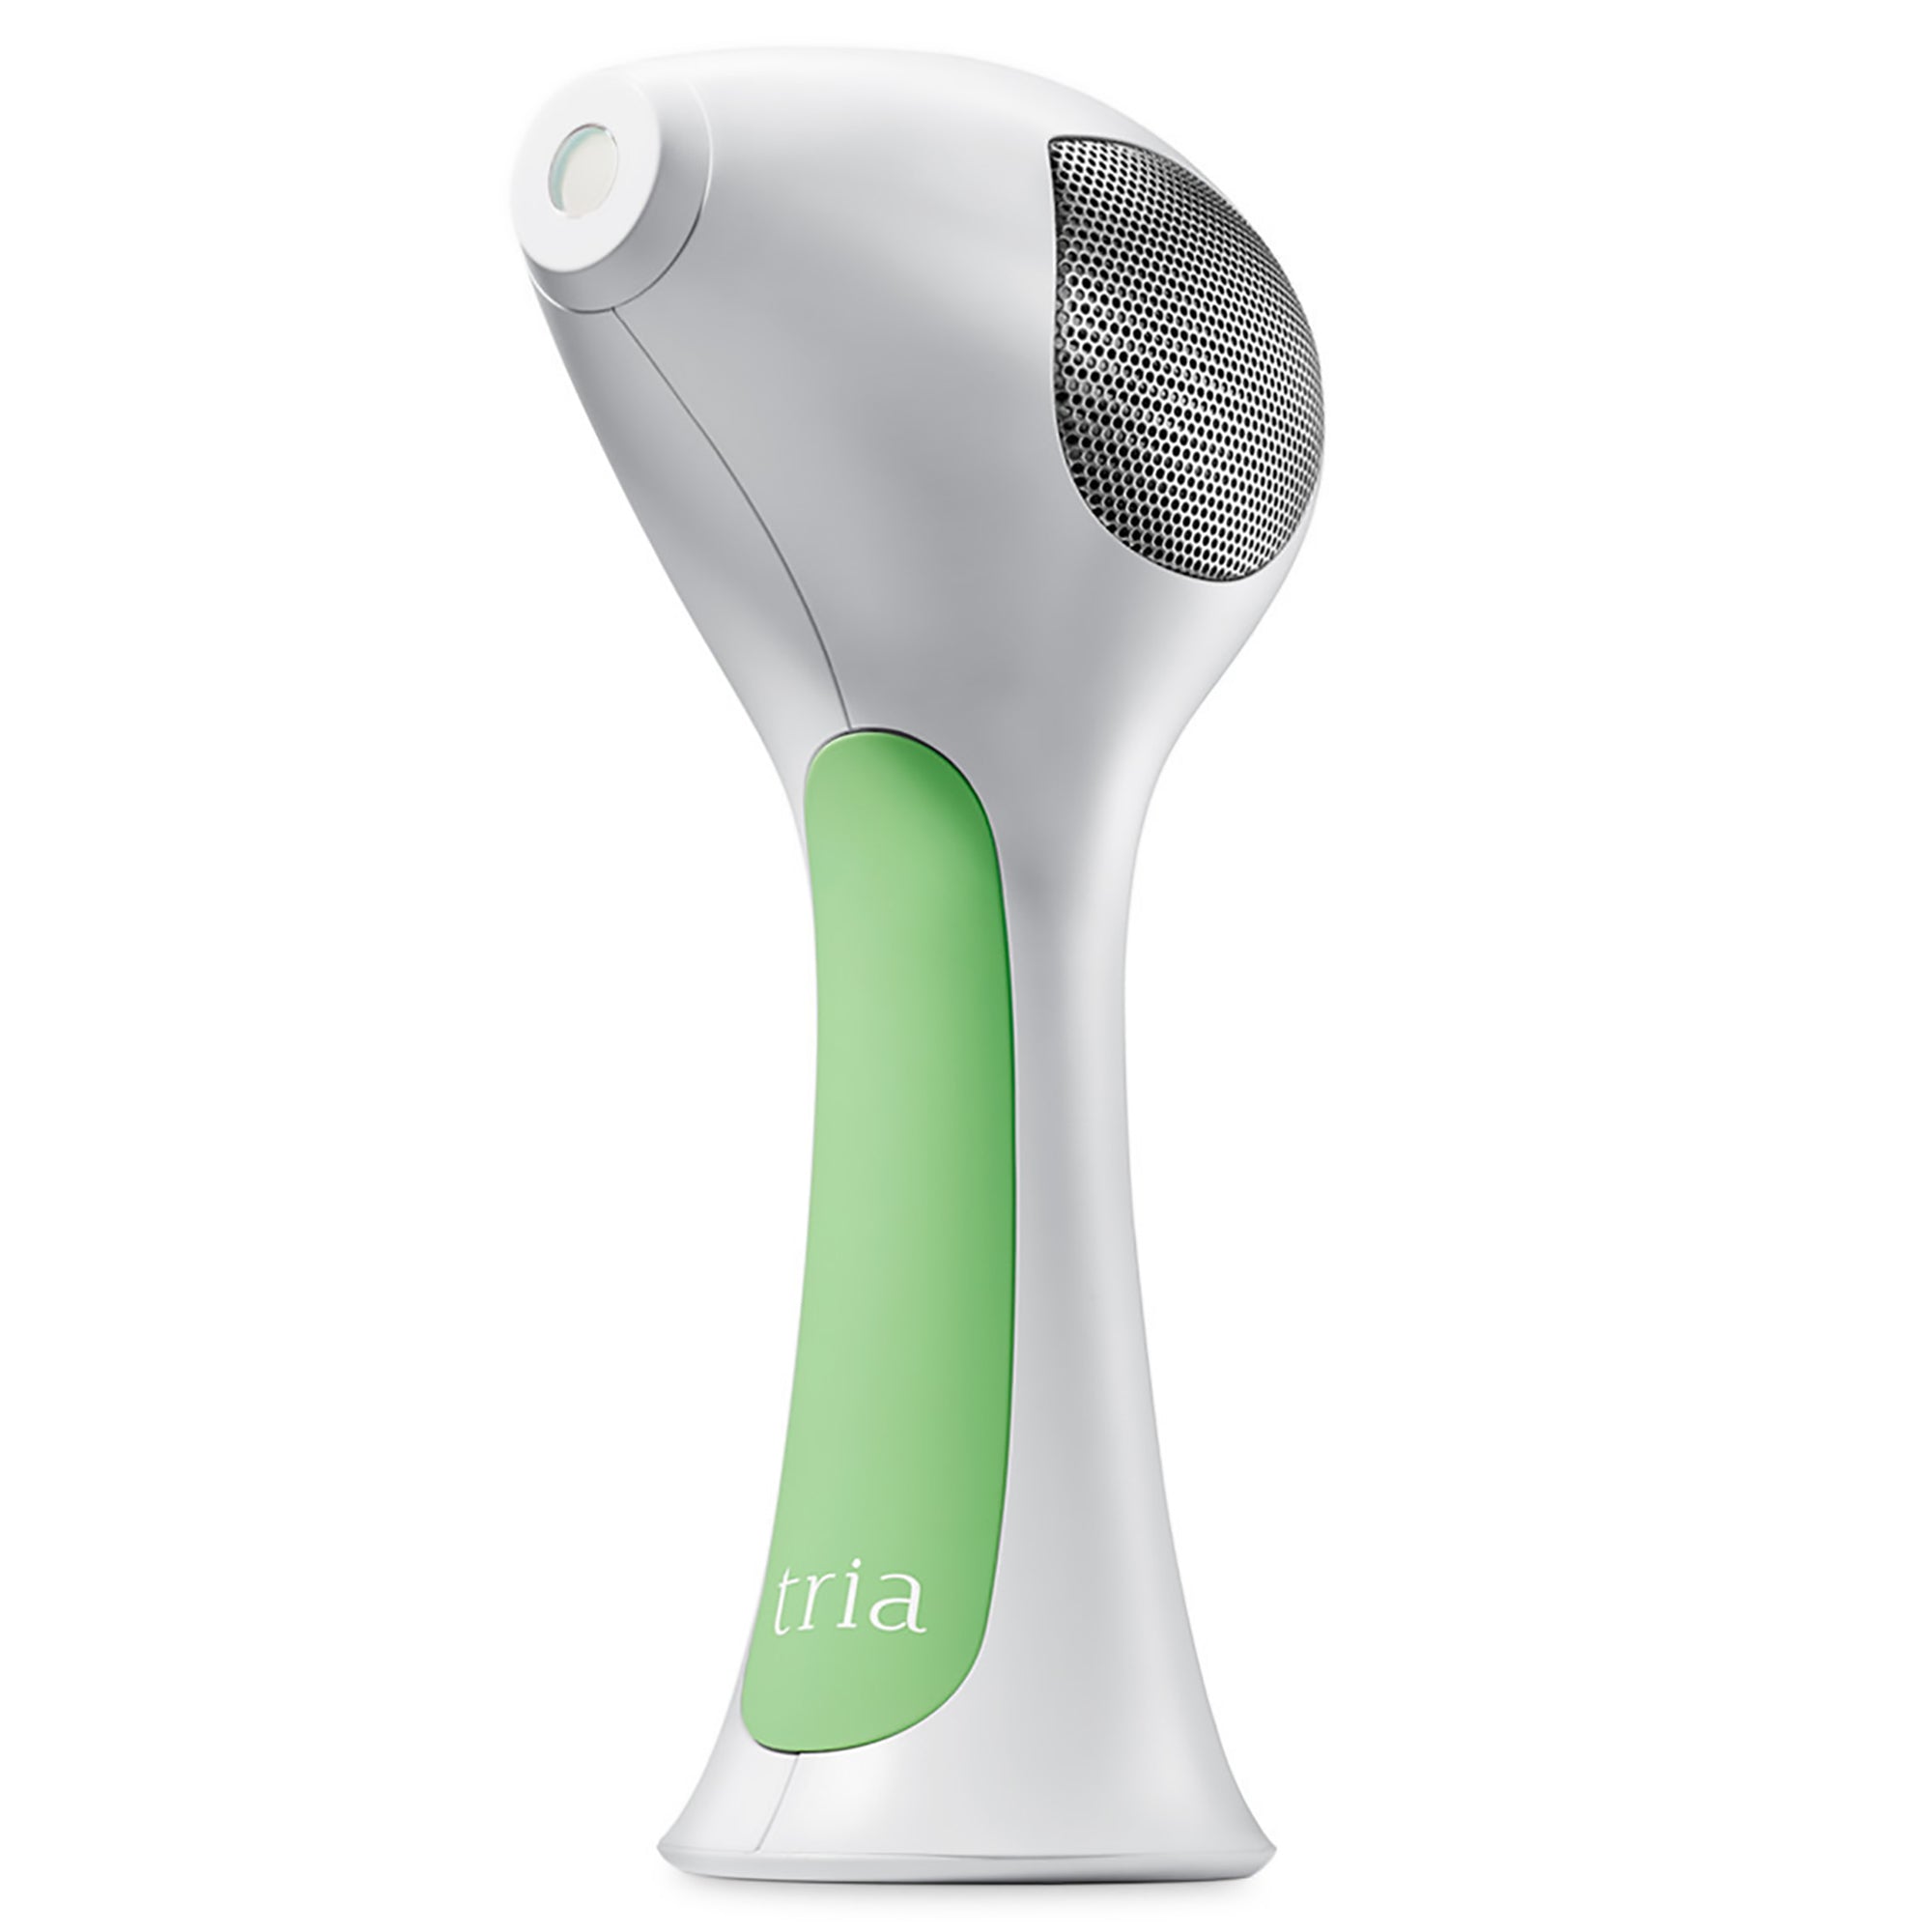 Tria Beauty Hair Removal Laser 4X -Green